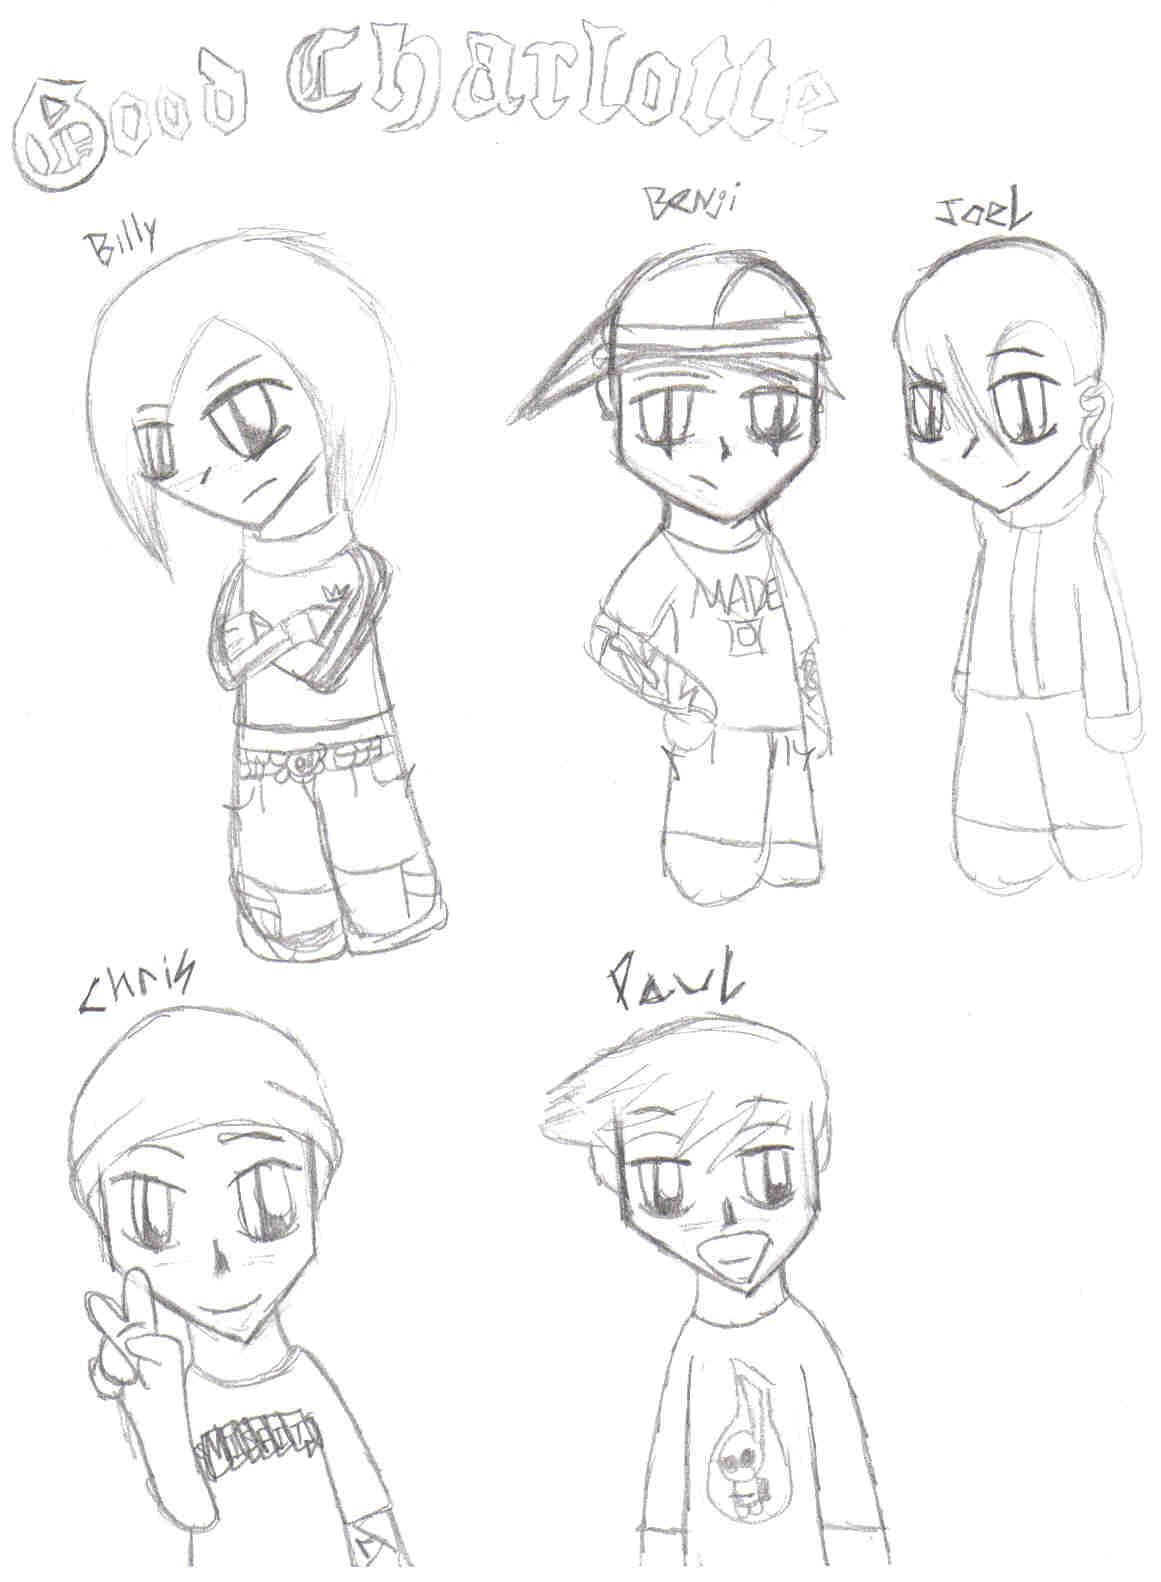 Chibi Good Charlotte by orchid